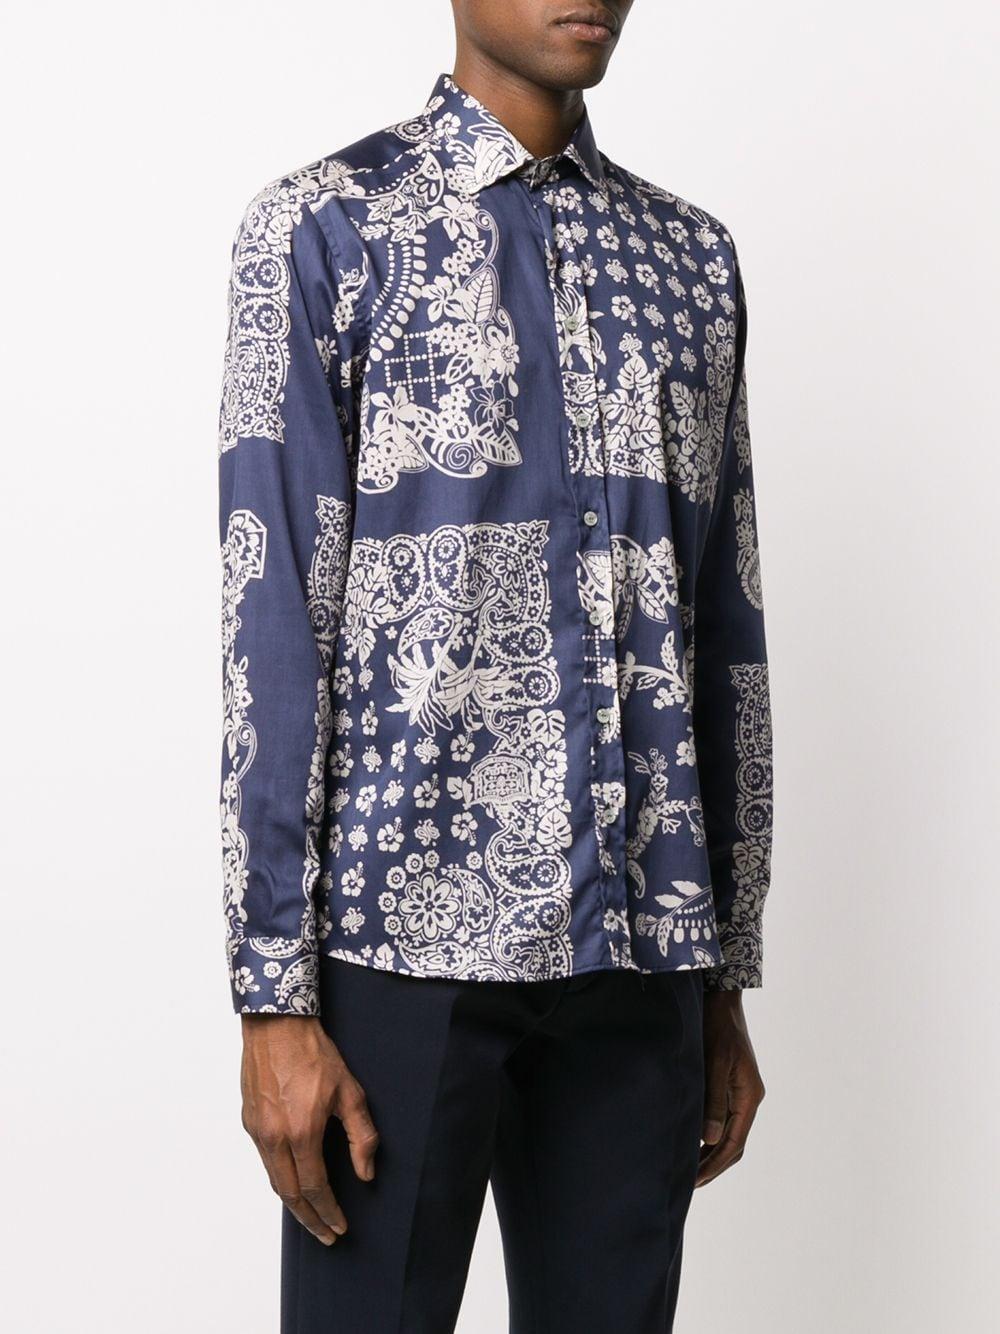 Etro Cotton Long-sleeved Paisley-print Shirt in Blue for Men - Lyst